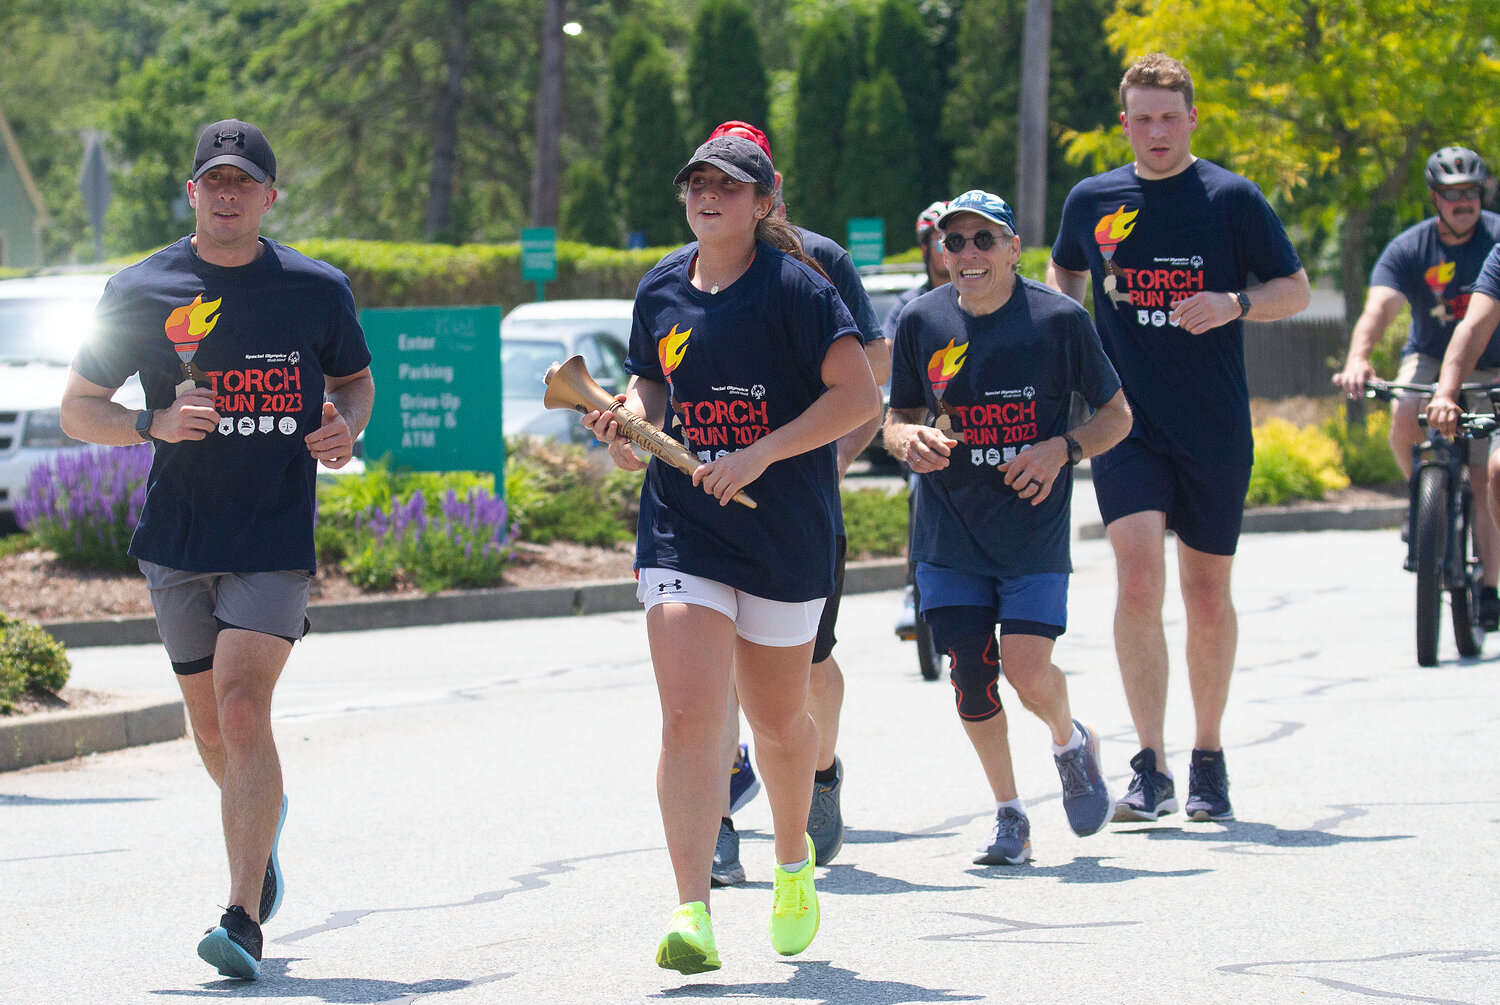 Barrington Police Officers Regan Jefferey (left), Kelsey Maynard (center) and Sean Murphy (right) carry the Special Olympics torch to East Providence, during the recent torch run.